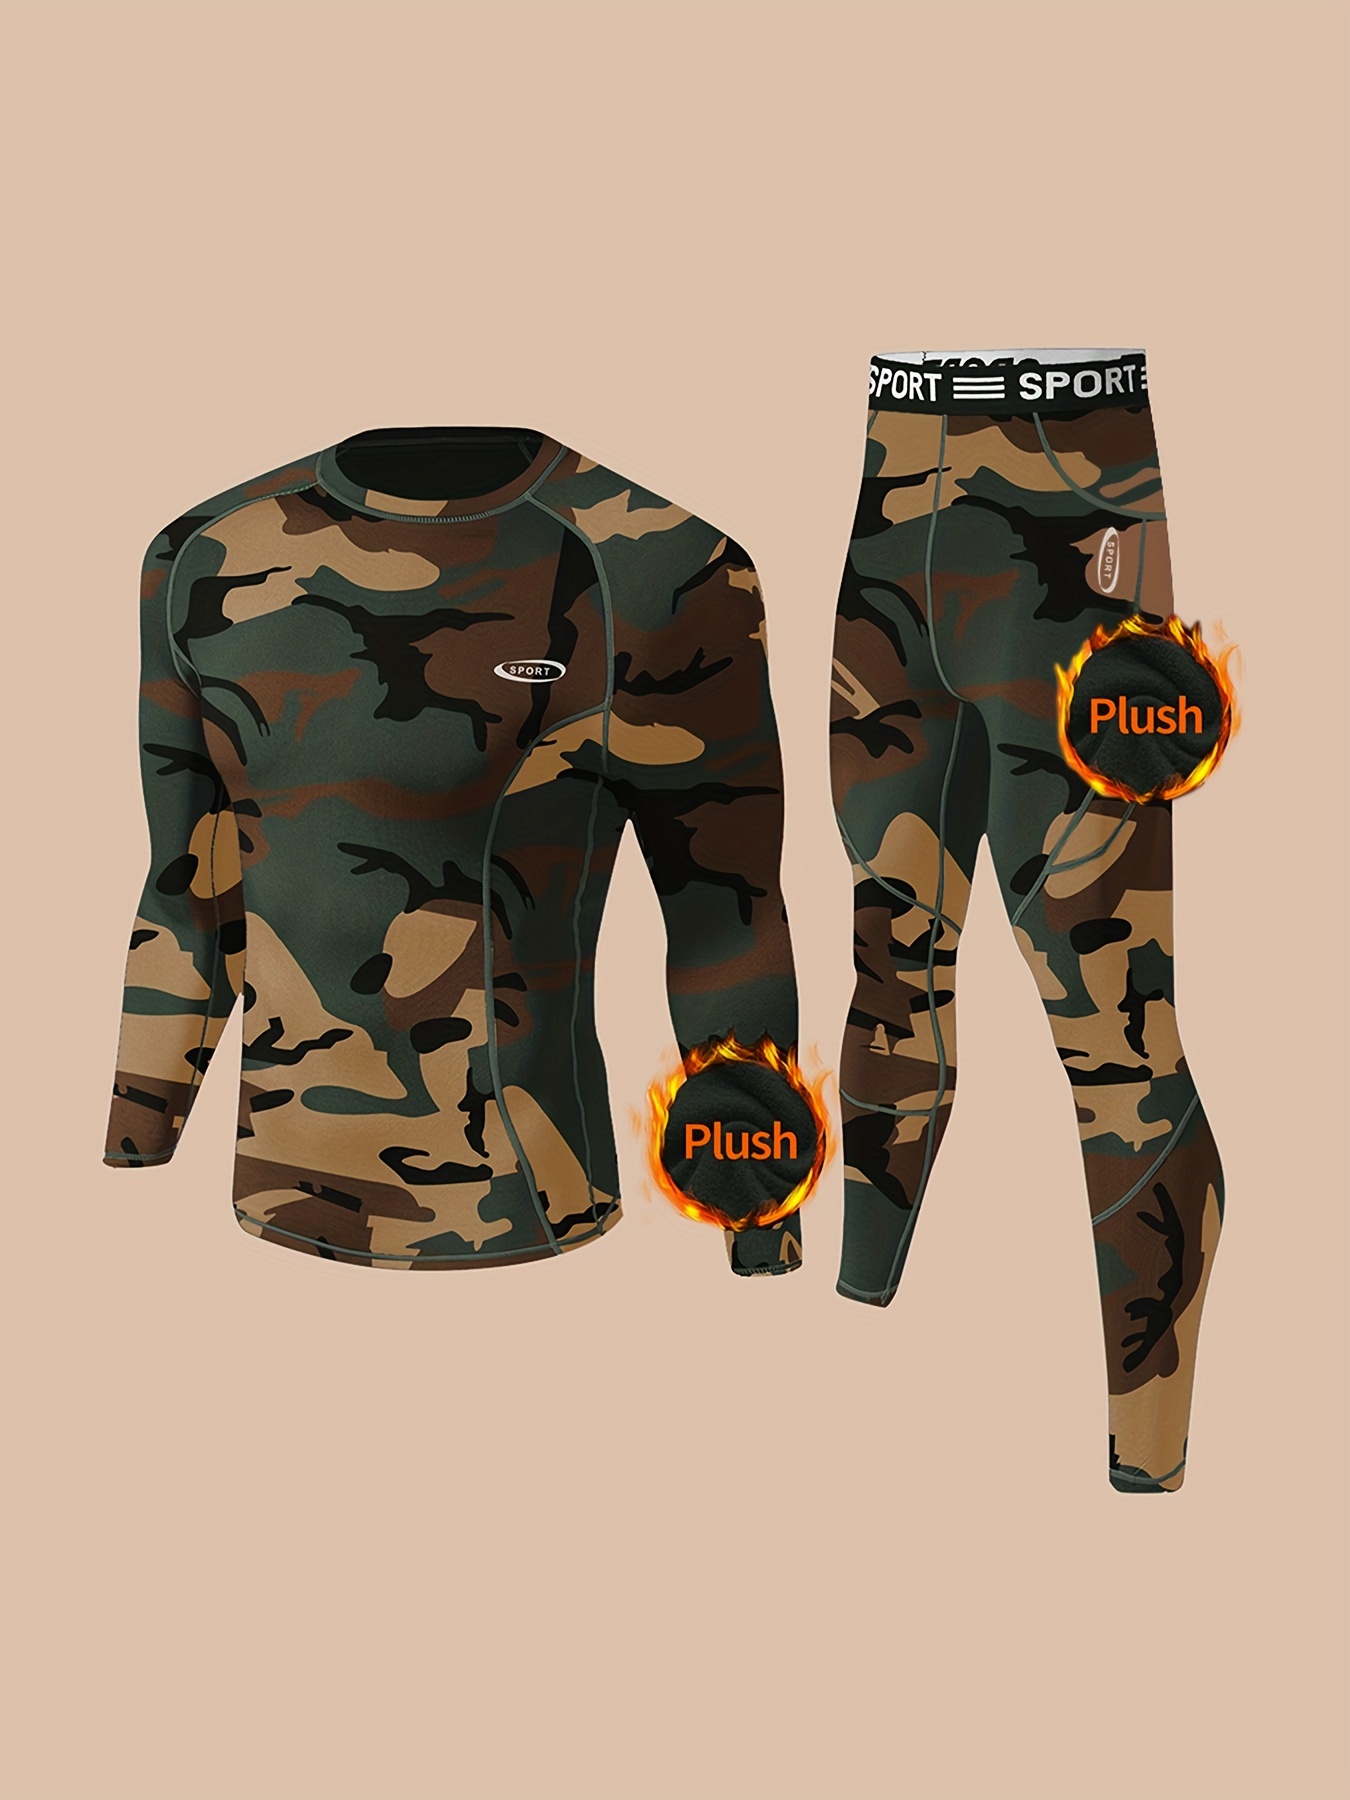 Camouflage Print Thermal Underwear For Men, Long Johns Set With Fleece,  Winter Hunting Outdoor Running Cycling Ski Equipment Sports Yoga Fitness  Base